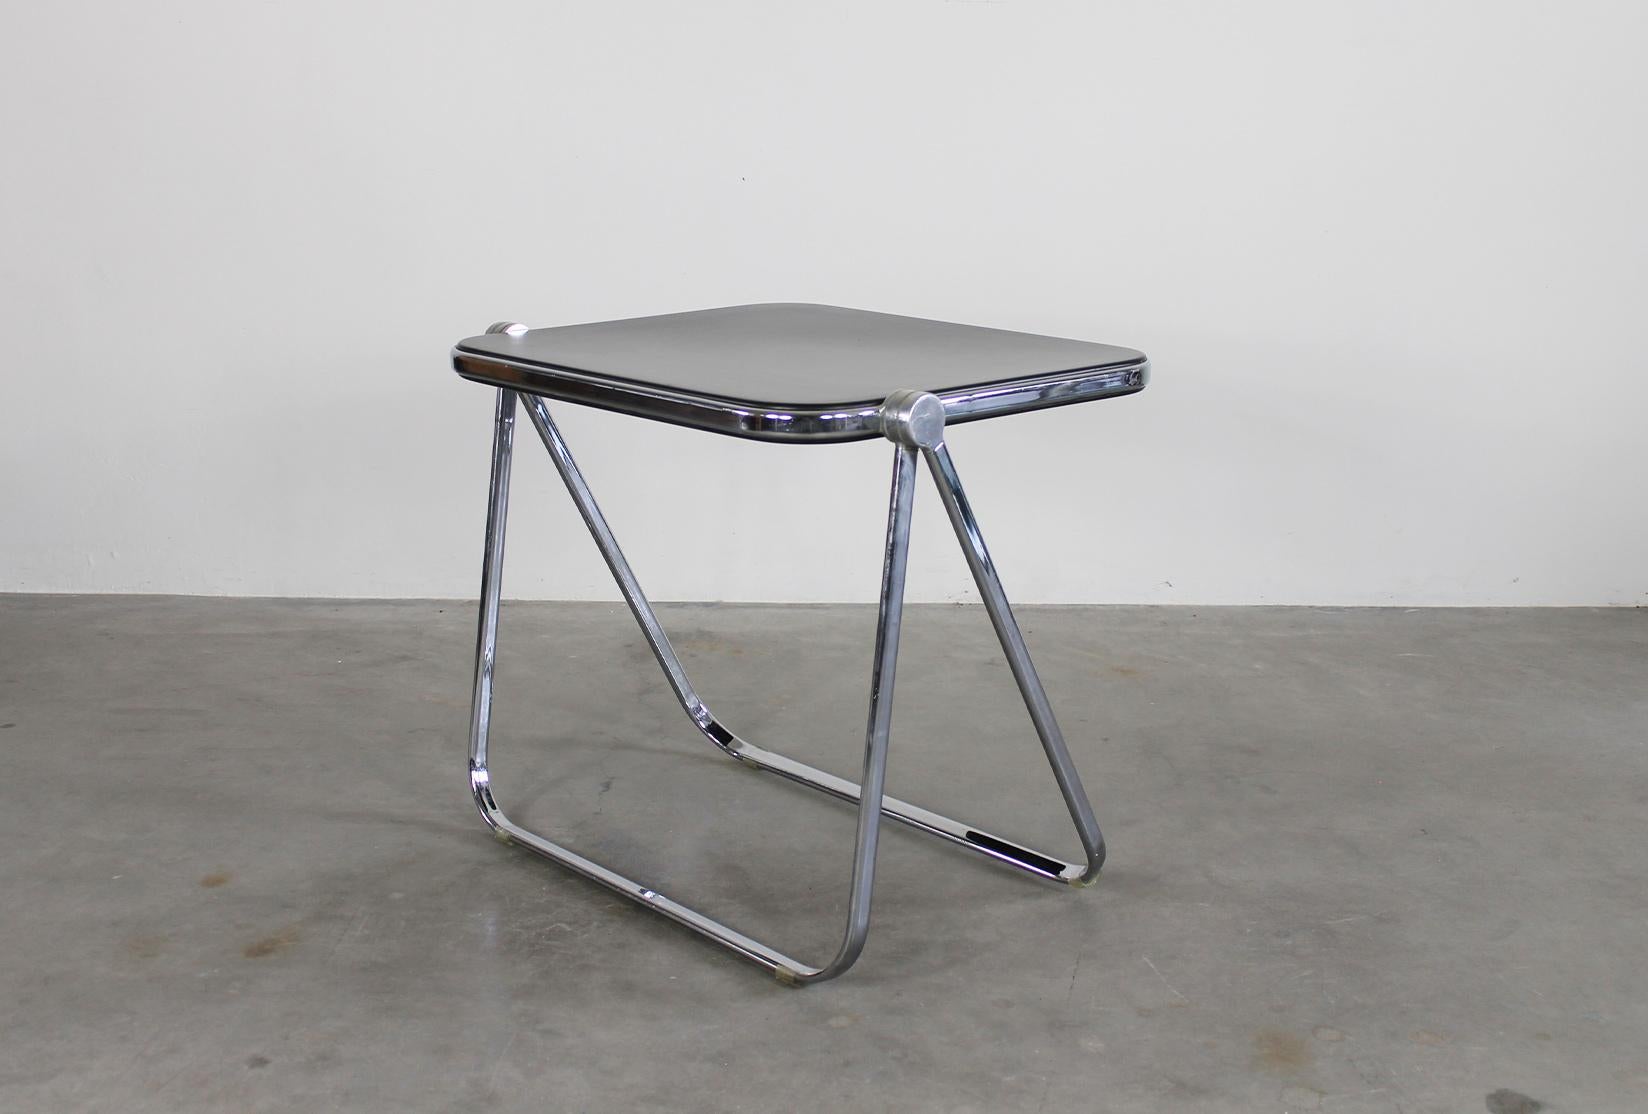 Platone folding table with structure in chromed steel and die-cast aluminum, table top in black polyurethane.
Designed by Giancarlo Piretti and produced by Anonima Castelli in 1970s, Italy. 
Platone table is part of the permanent design collection